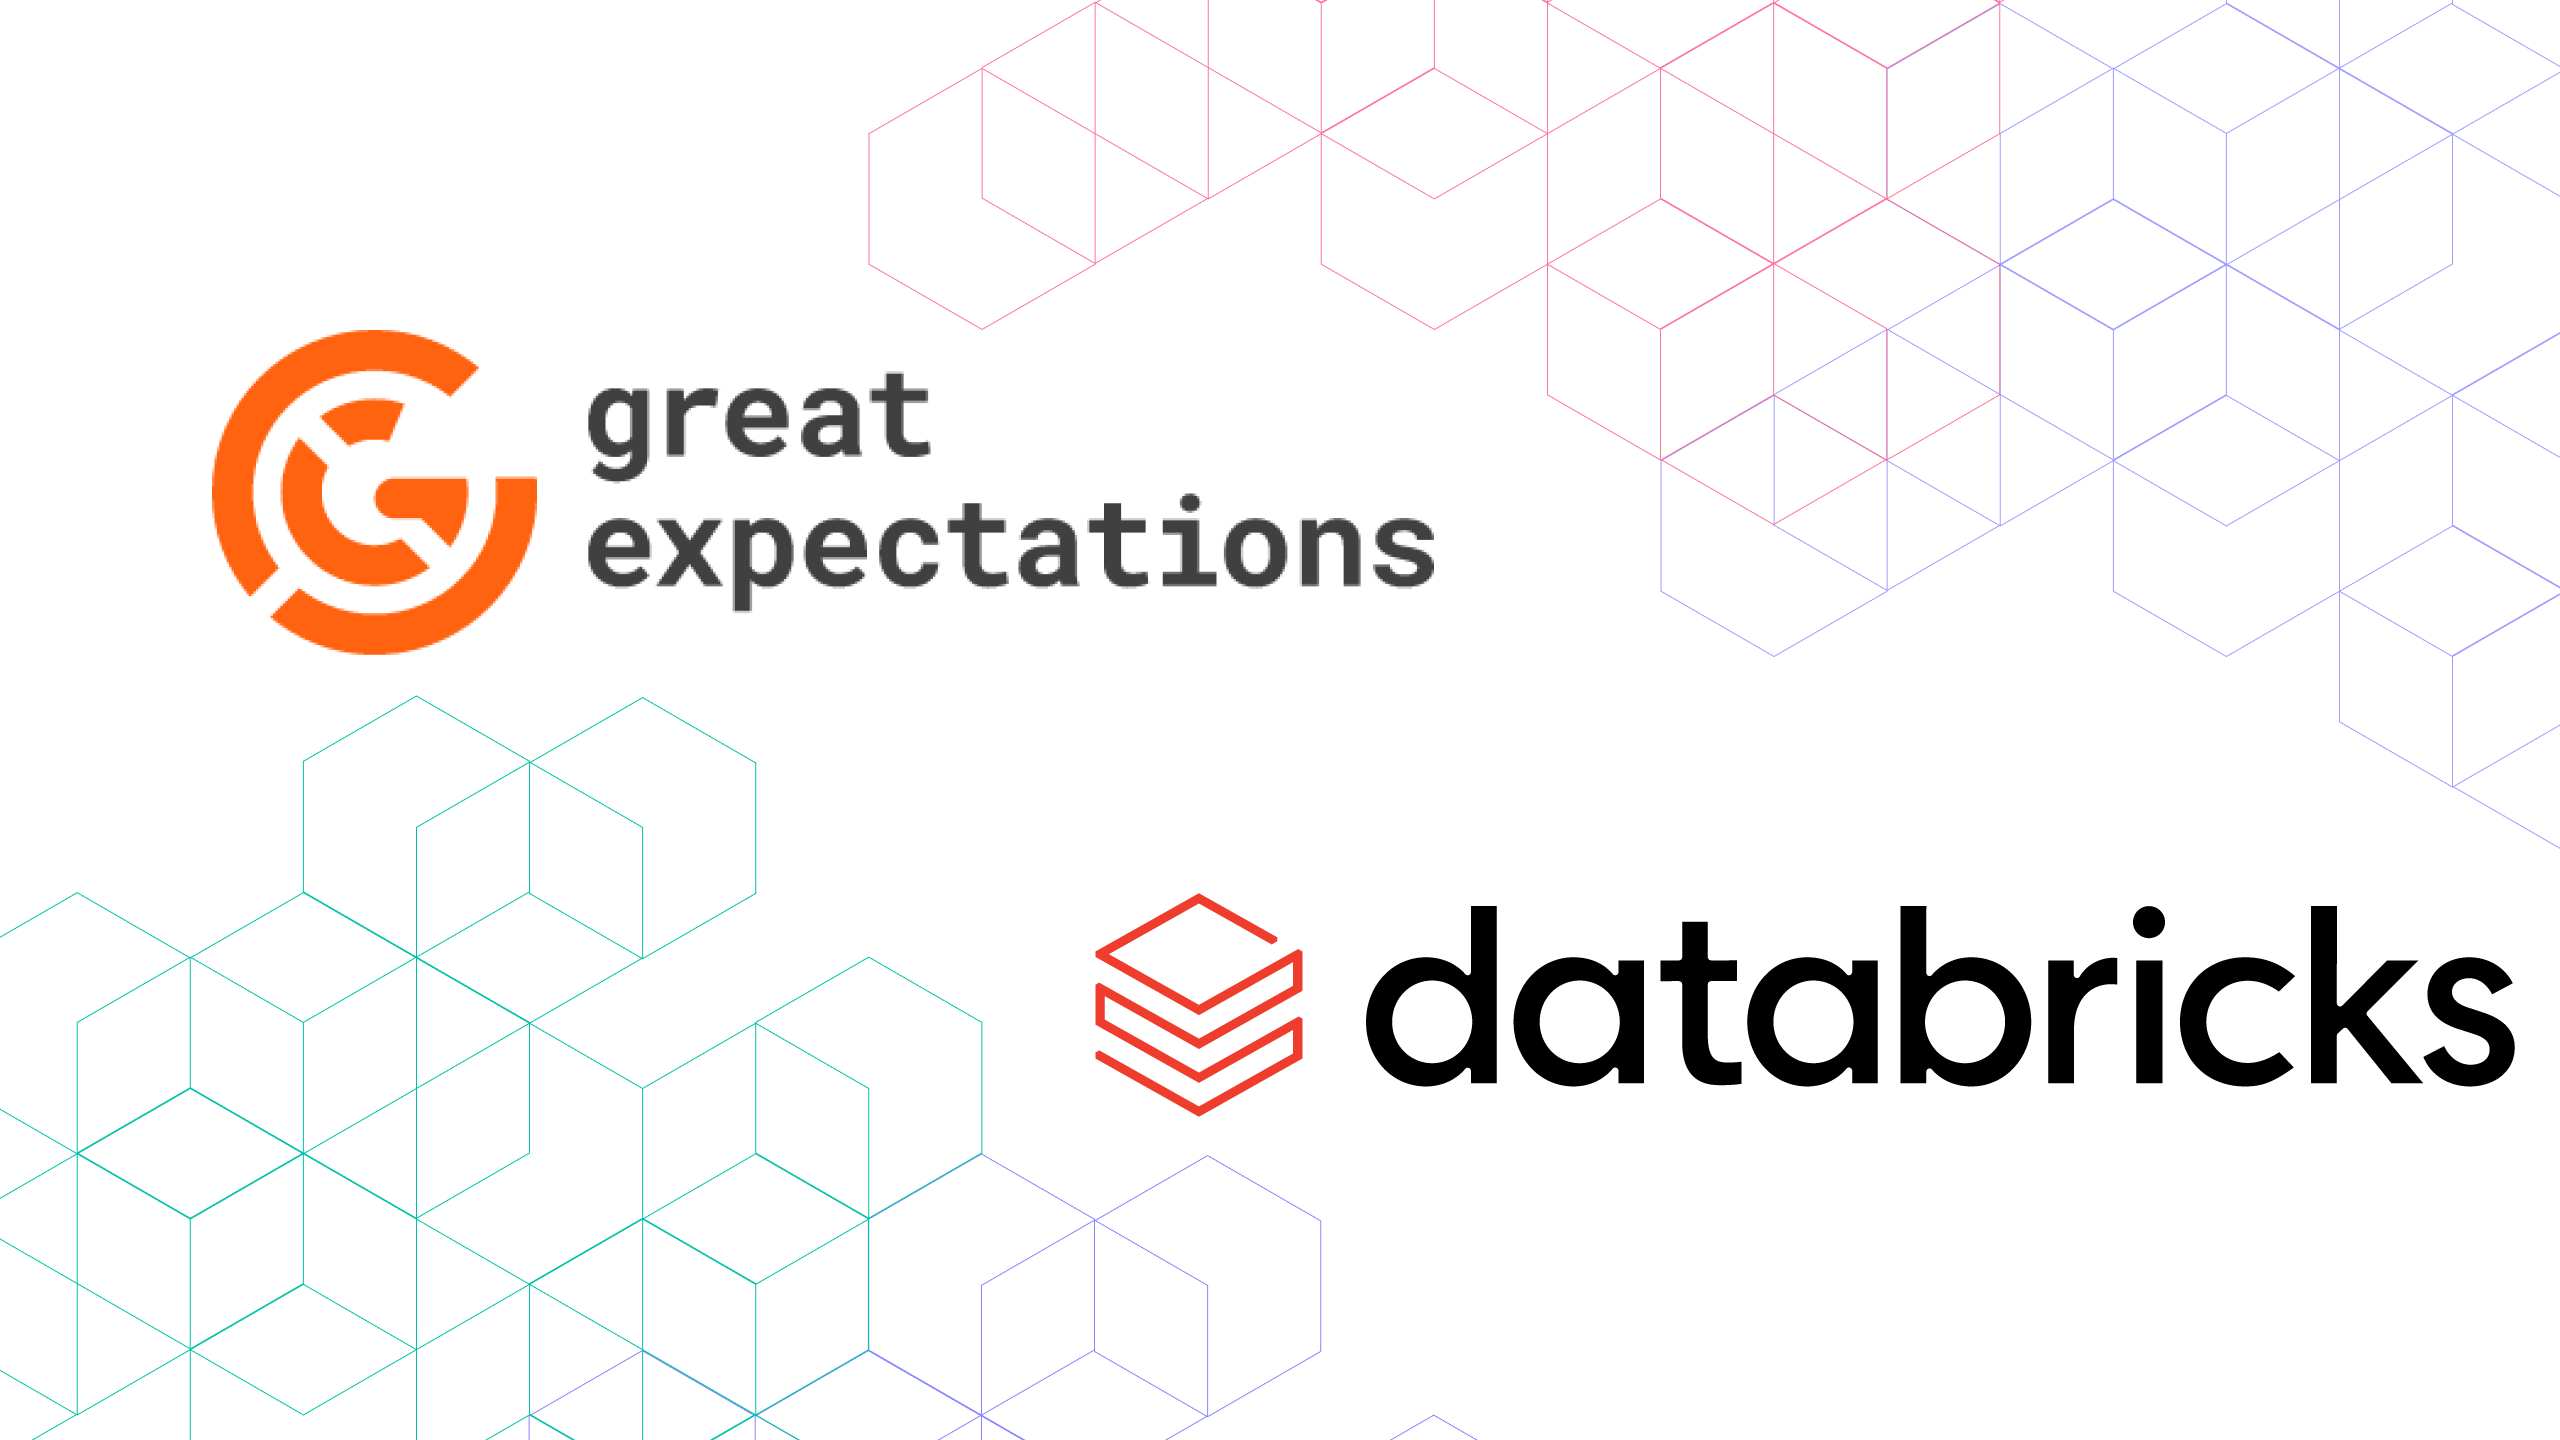 the Great Expectations and Databricks logos together